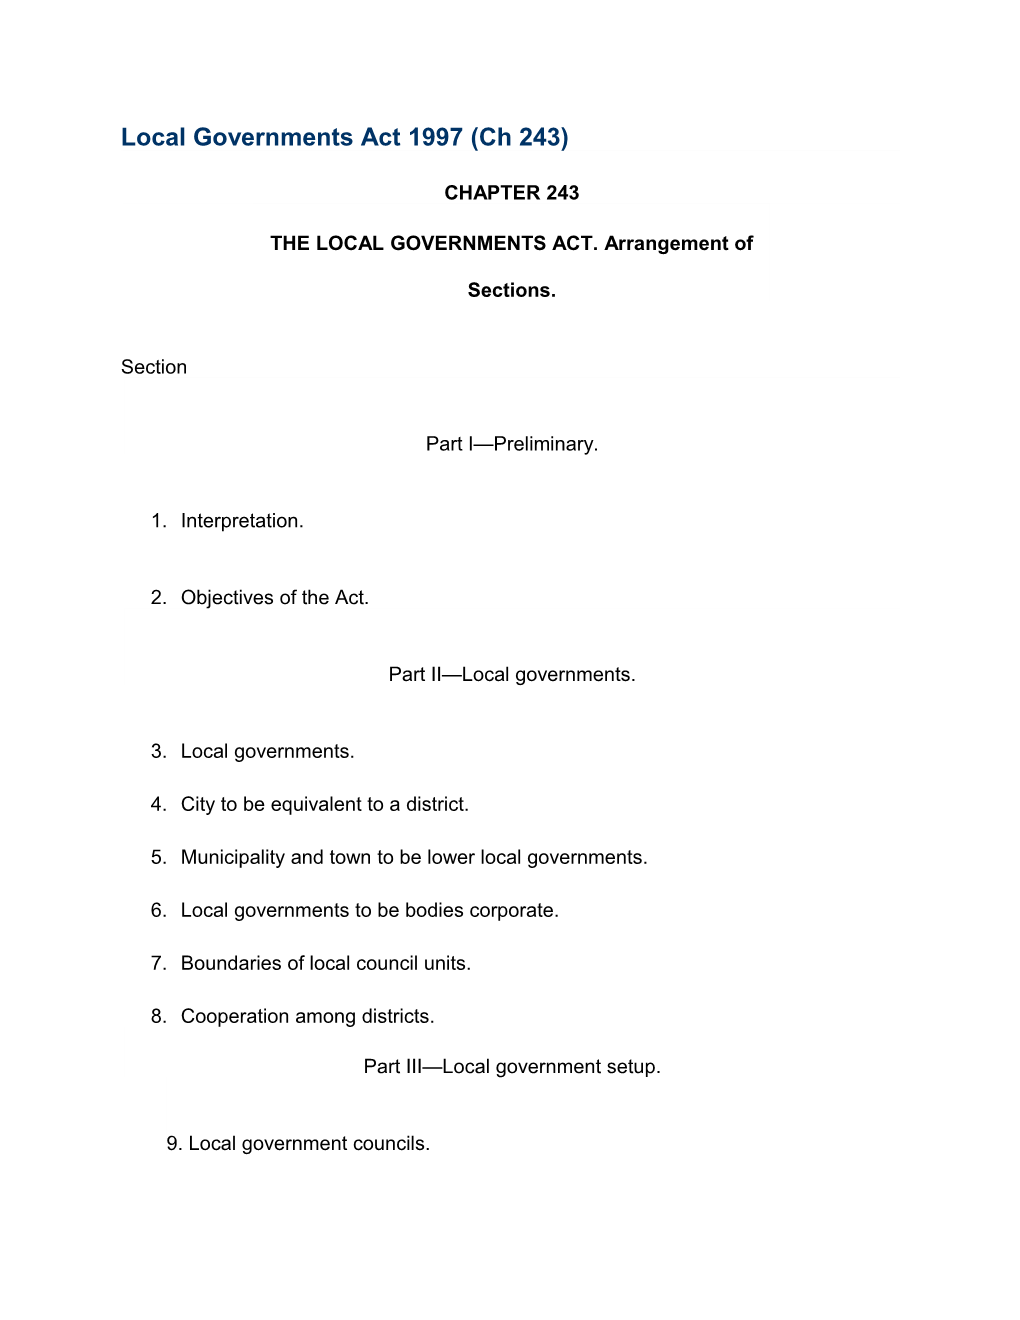 THE LOCAL GOVERNMENTS ACT. Arrangement of Sections